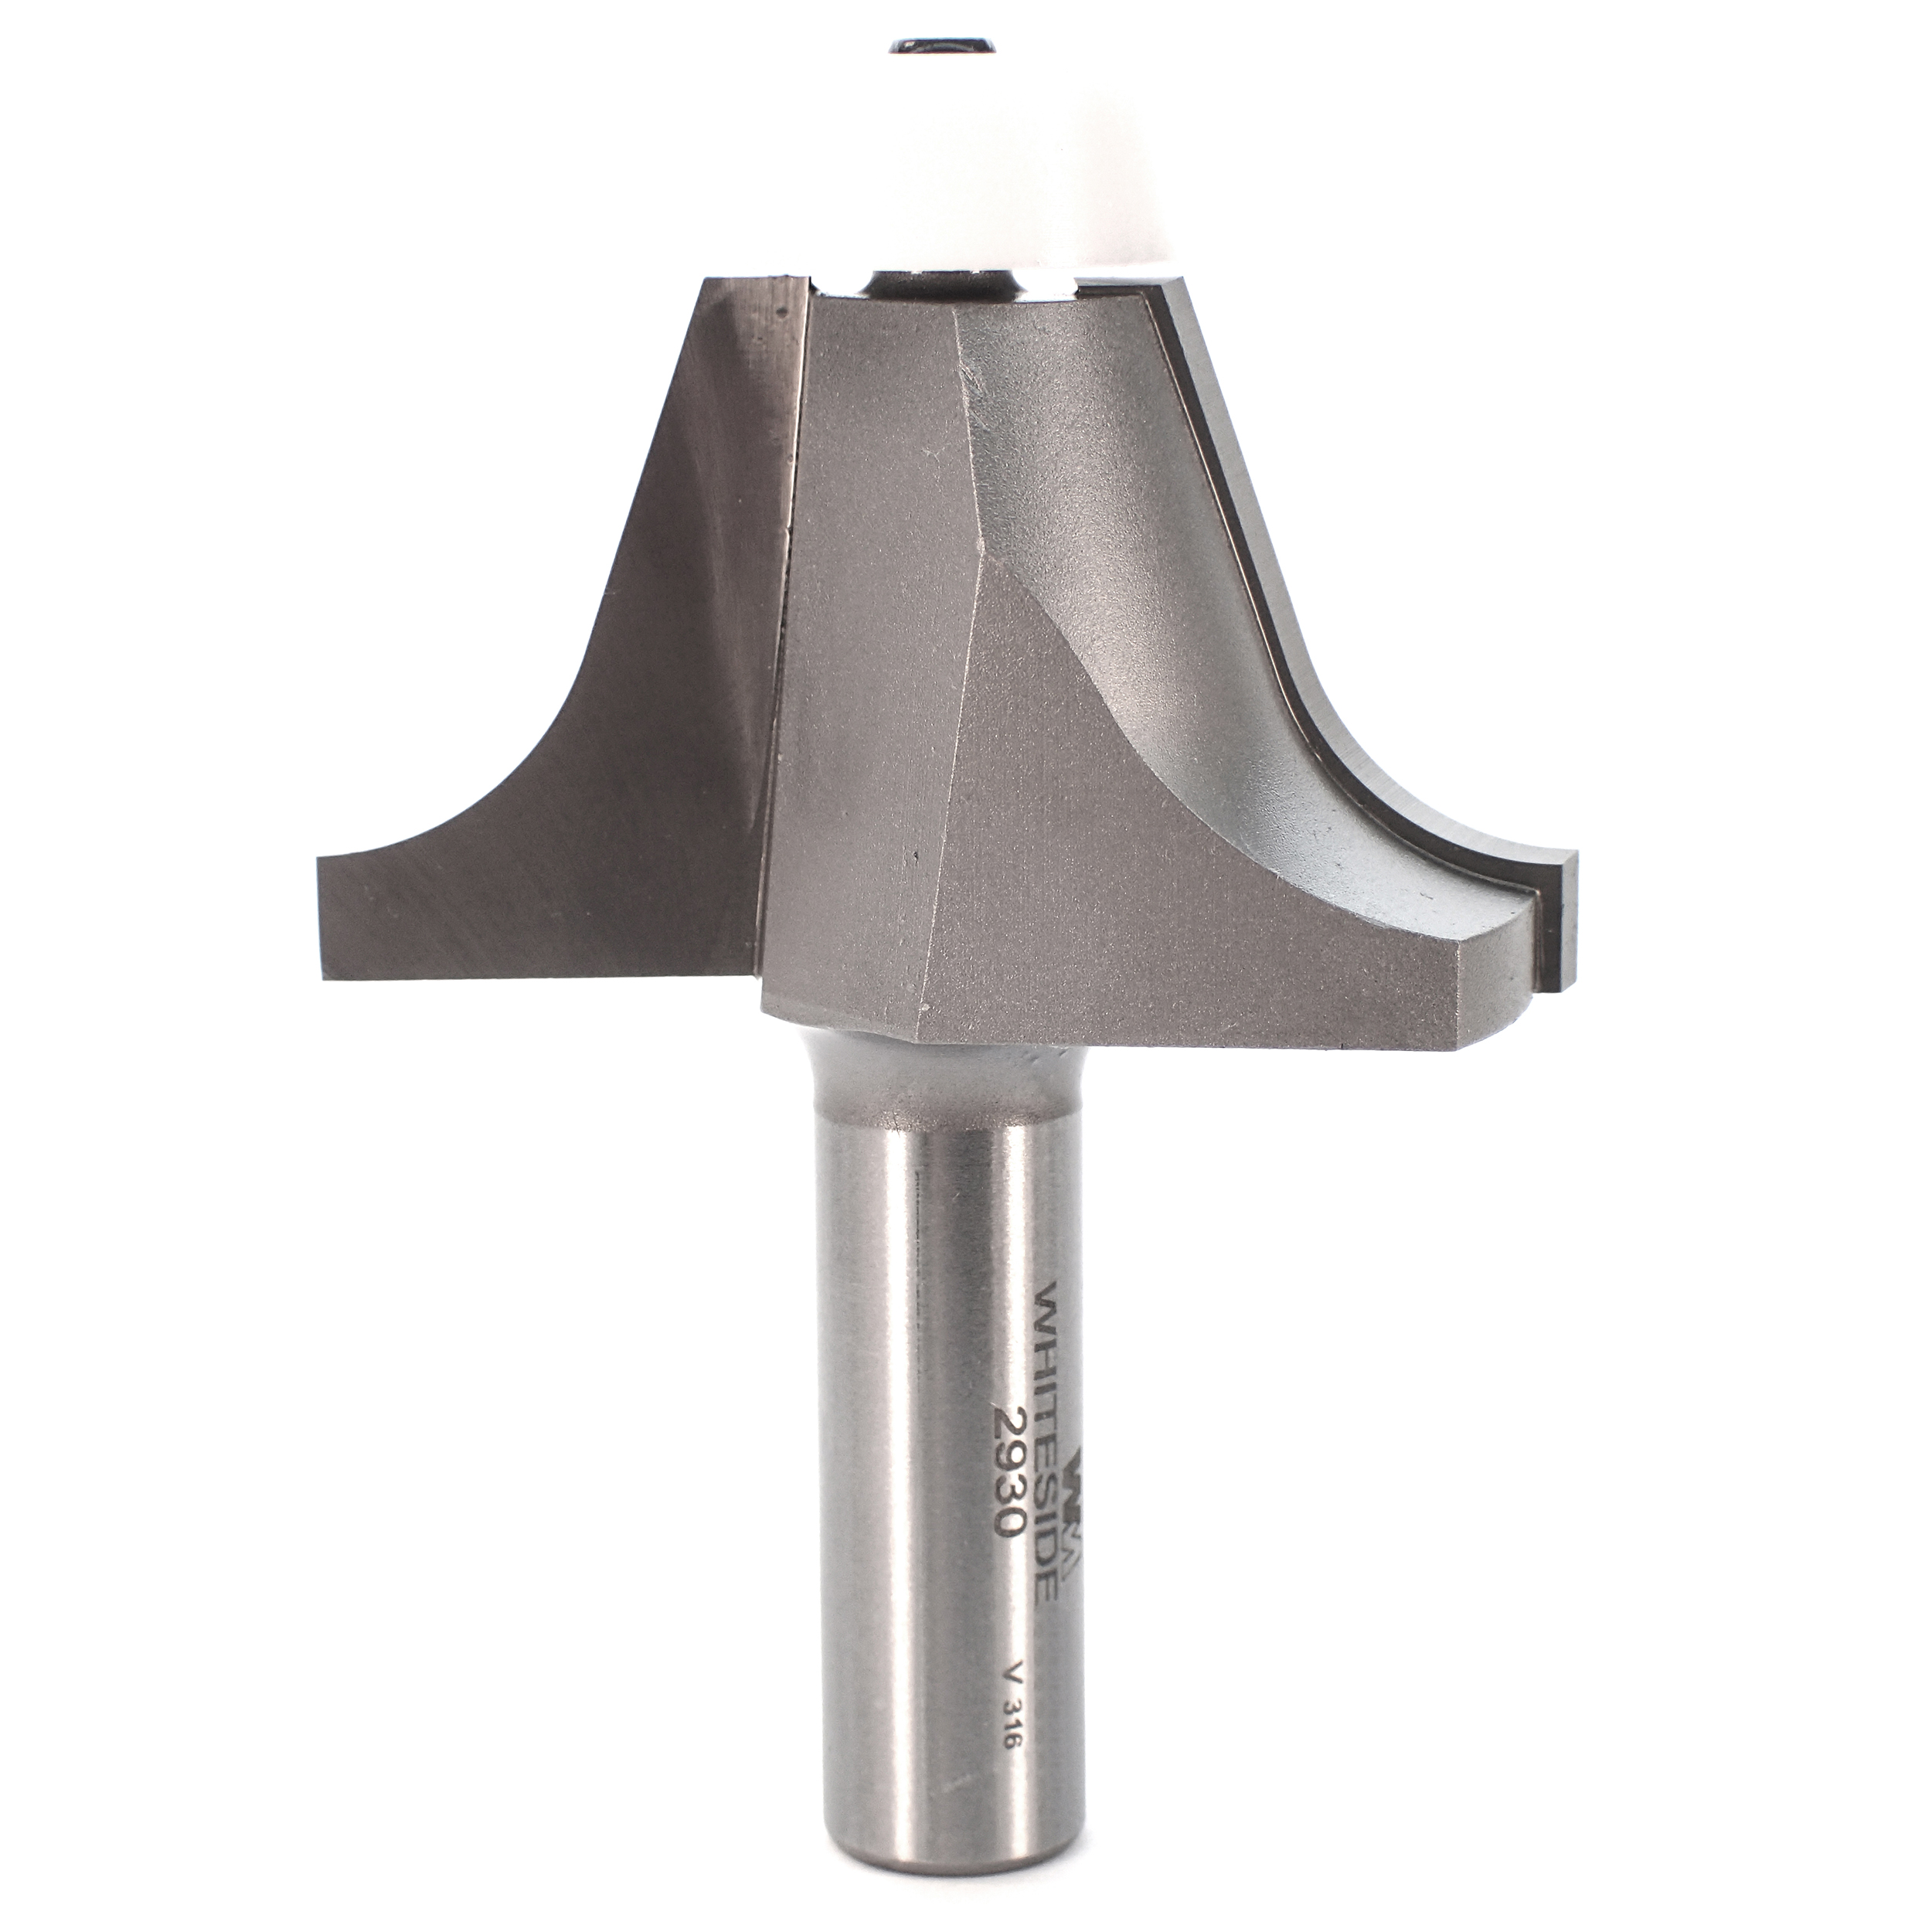 2930 Solid Surface Rounding Over Undermount Router Bit 3/4" M X 18 3-1/4" Ol